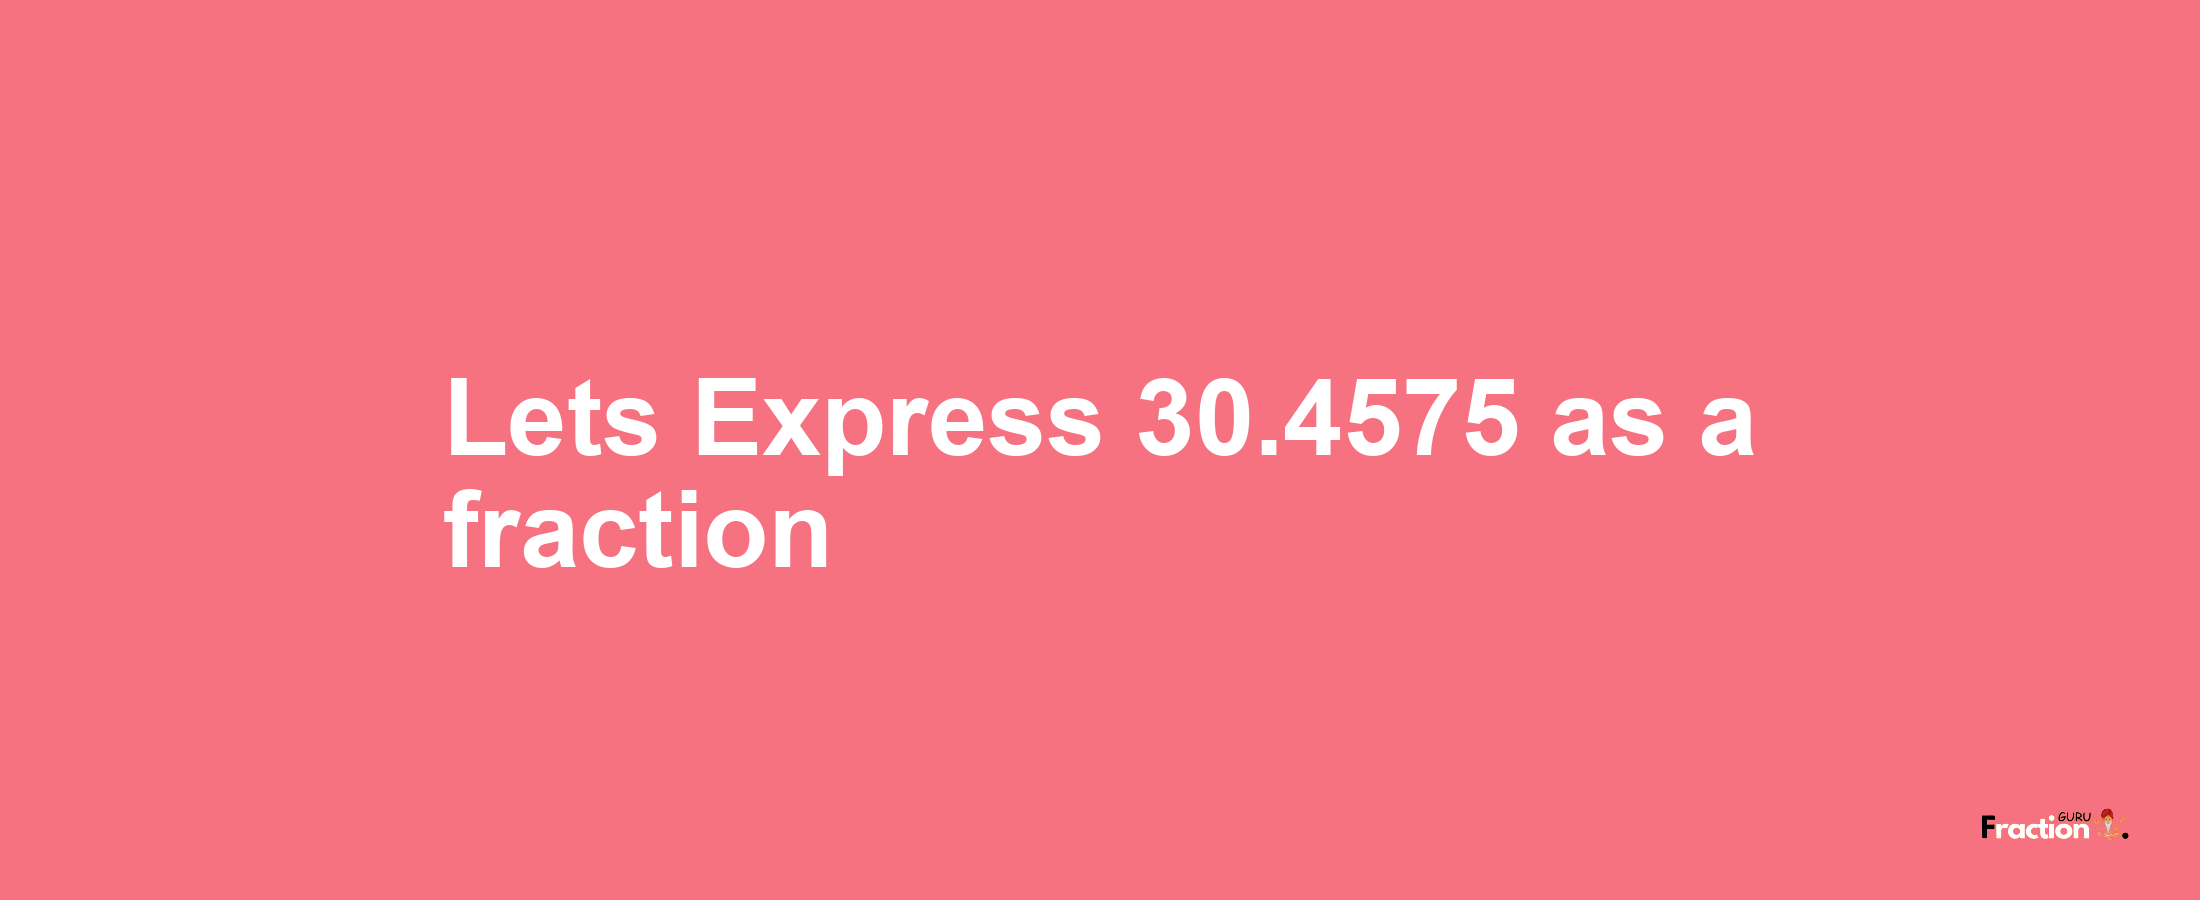 Lets Express 30.4575 as afraction